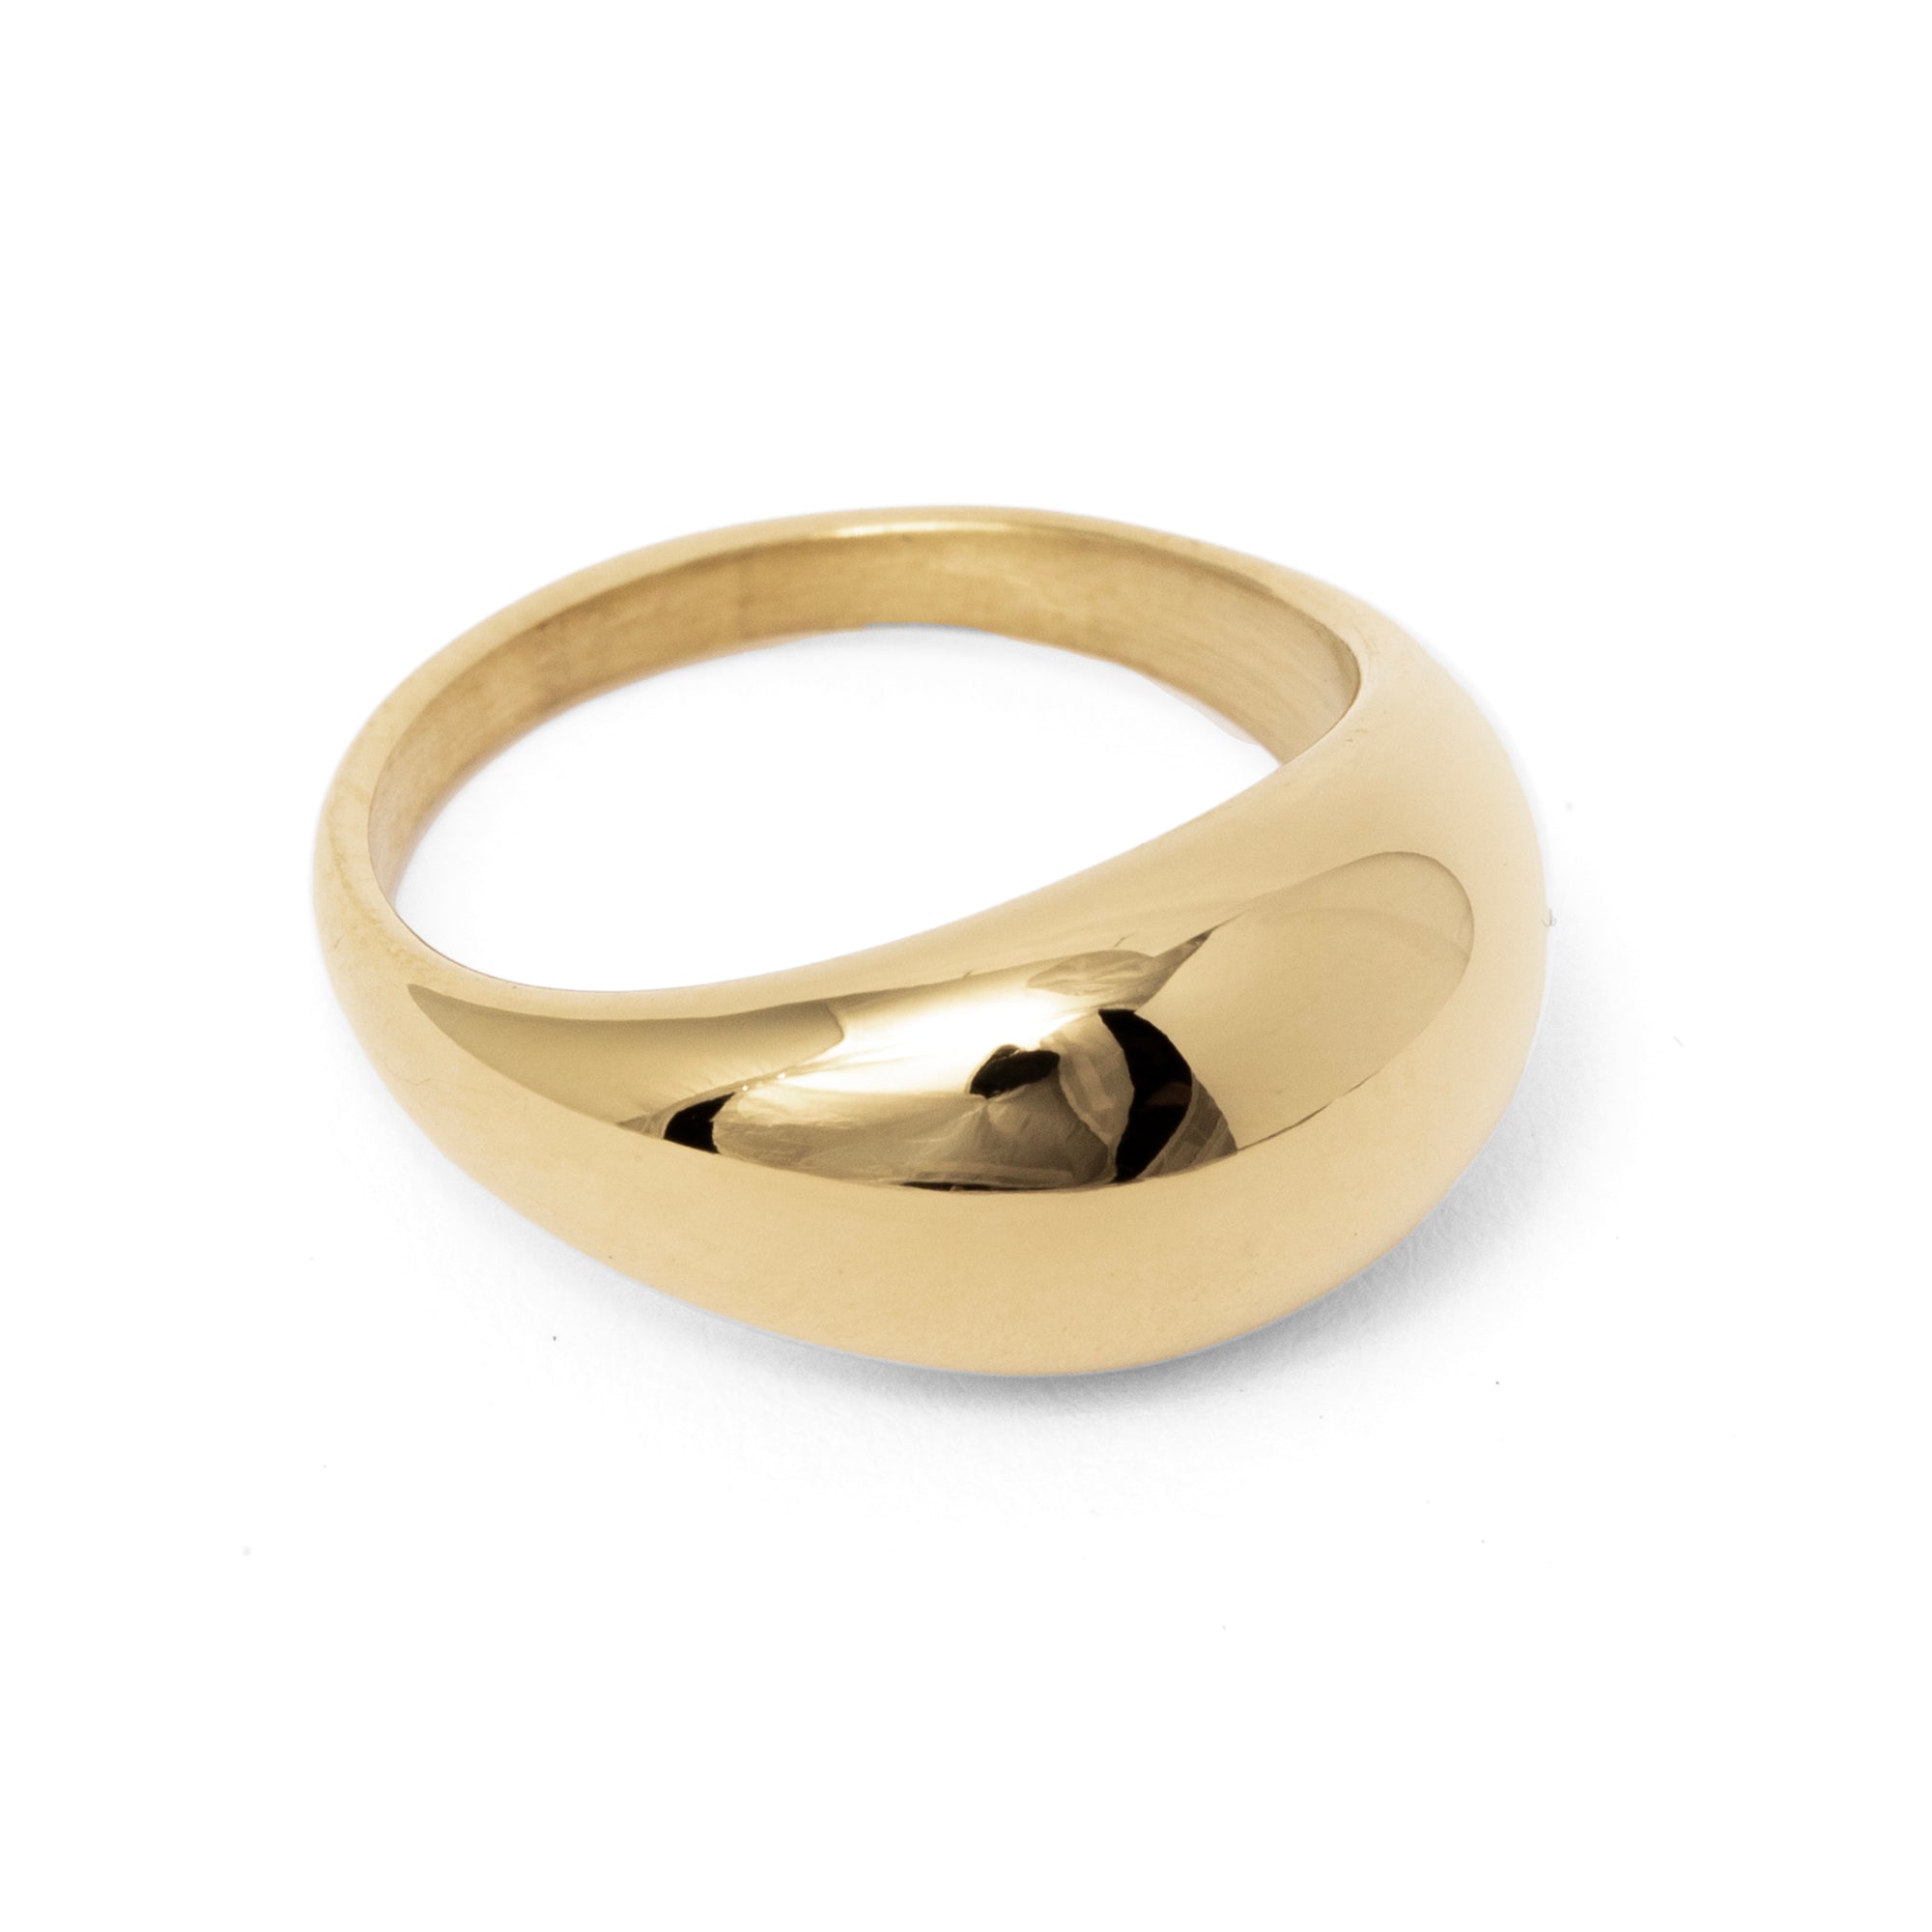 The XL Nelly Dome RingBy Rae Jewellery